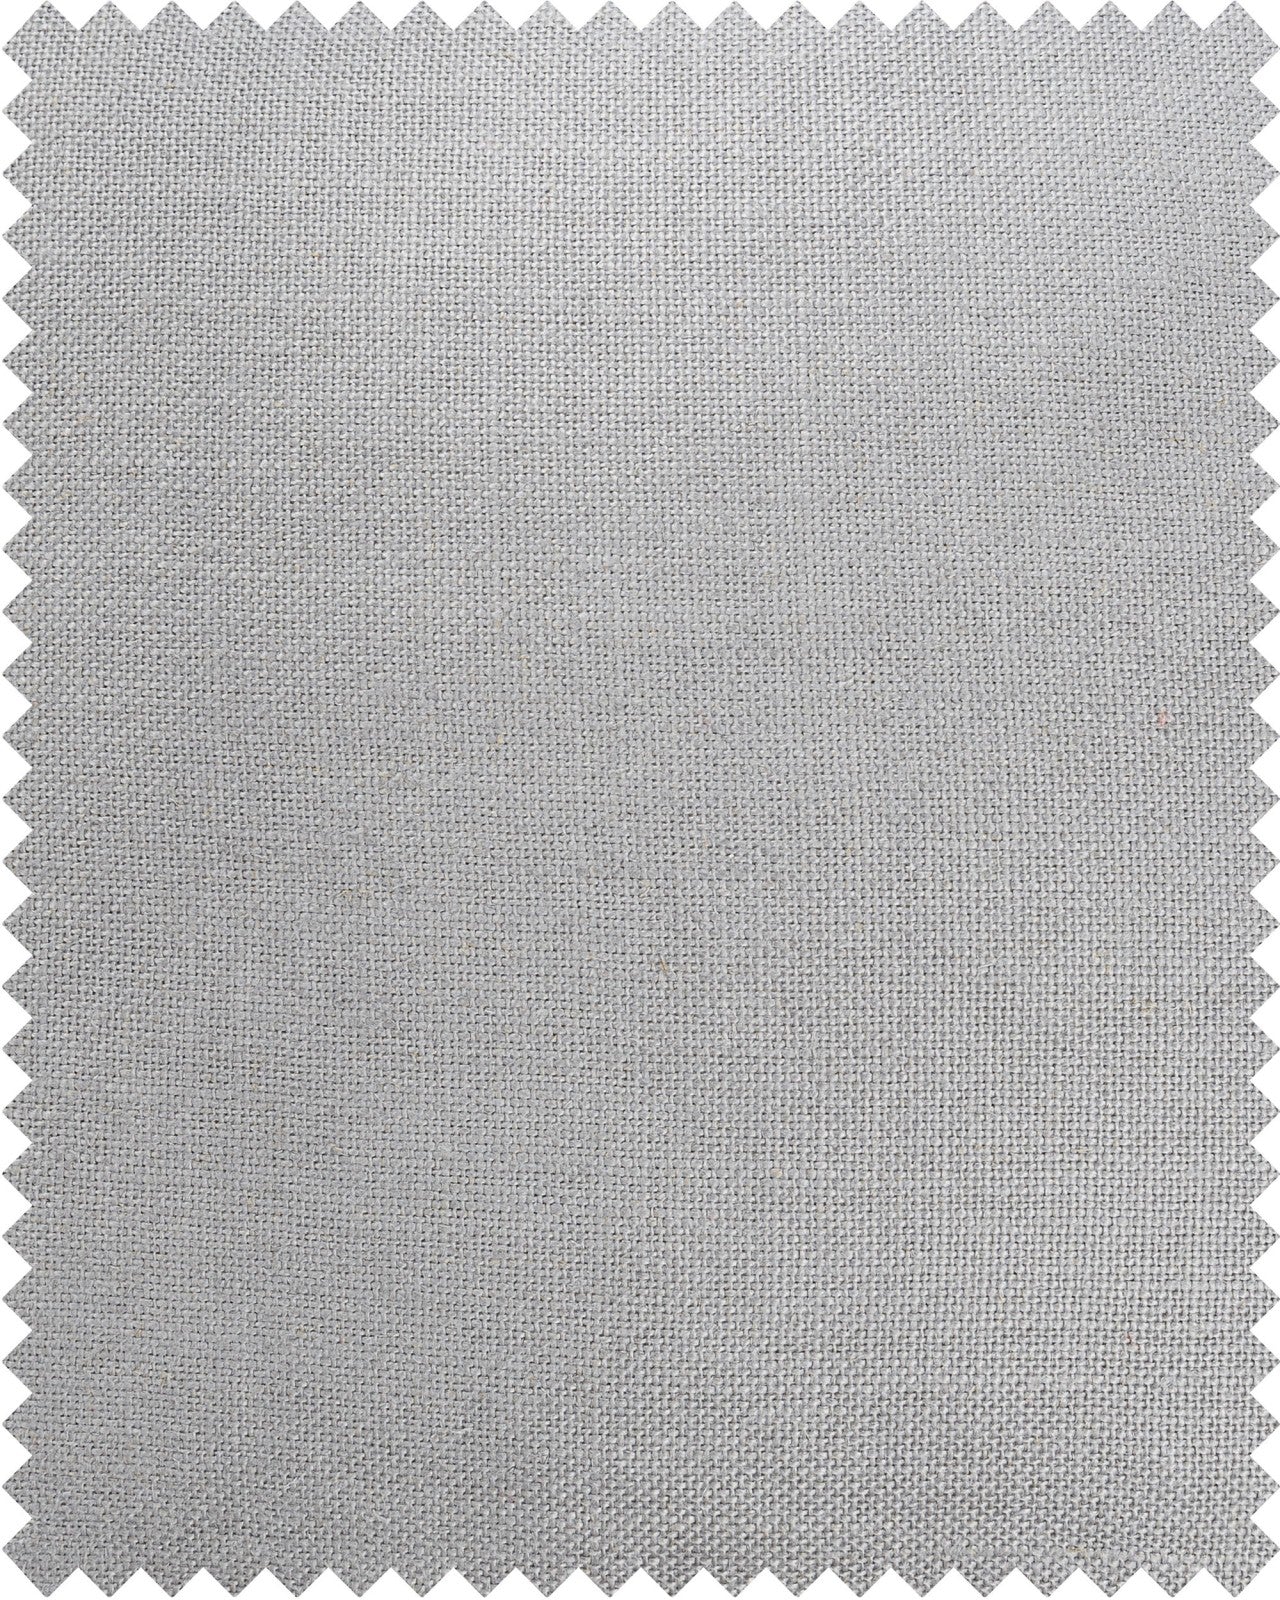 Frost fabric in grey color - pattern number FB00013 - by Mind The Gap in the Vintage Linens collection